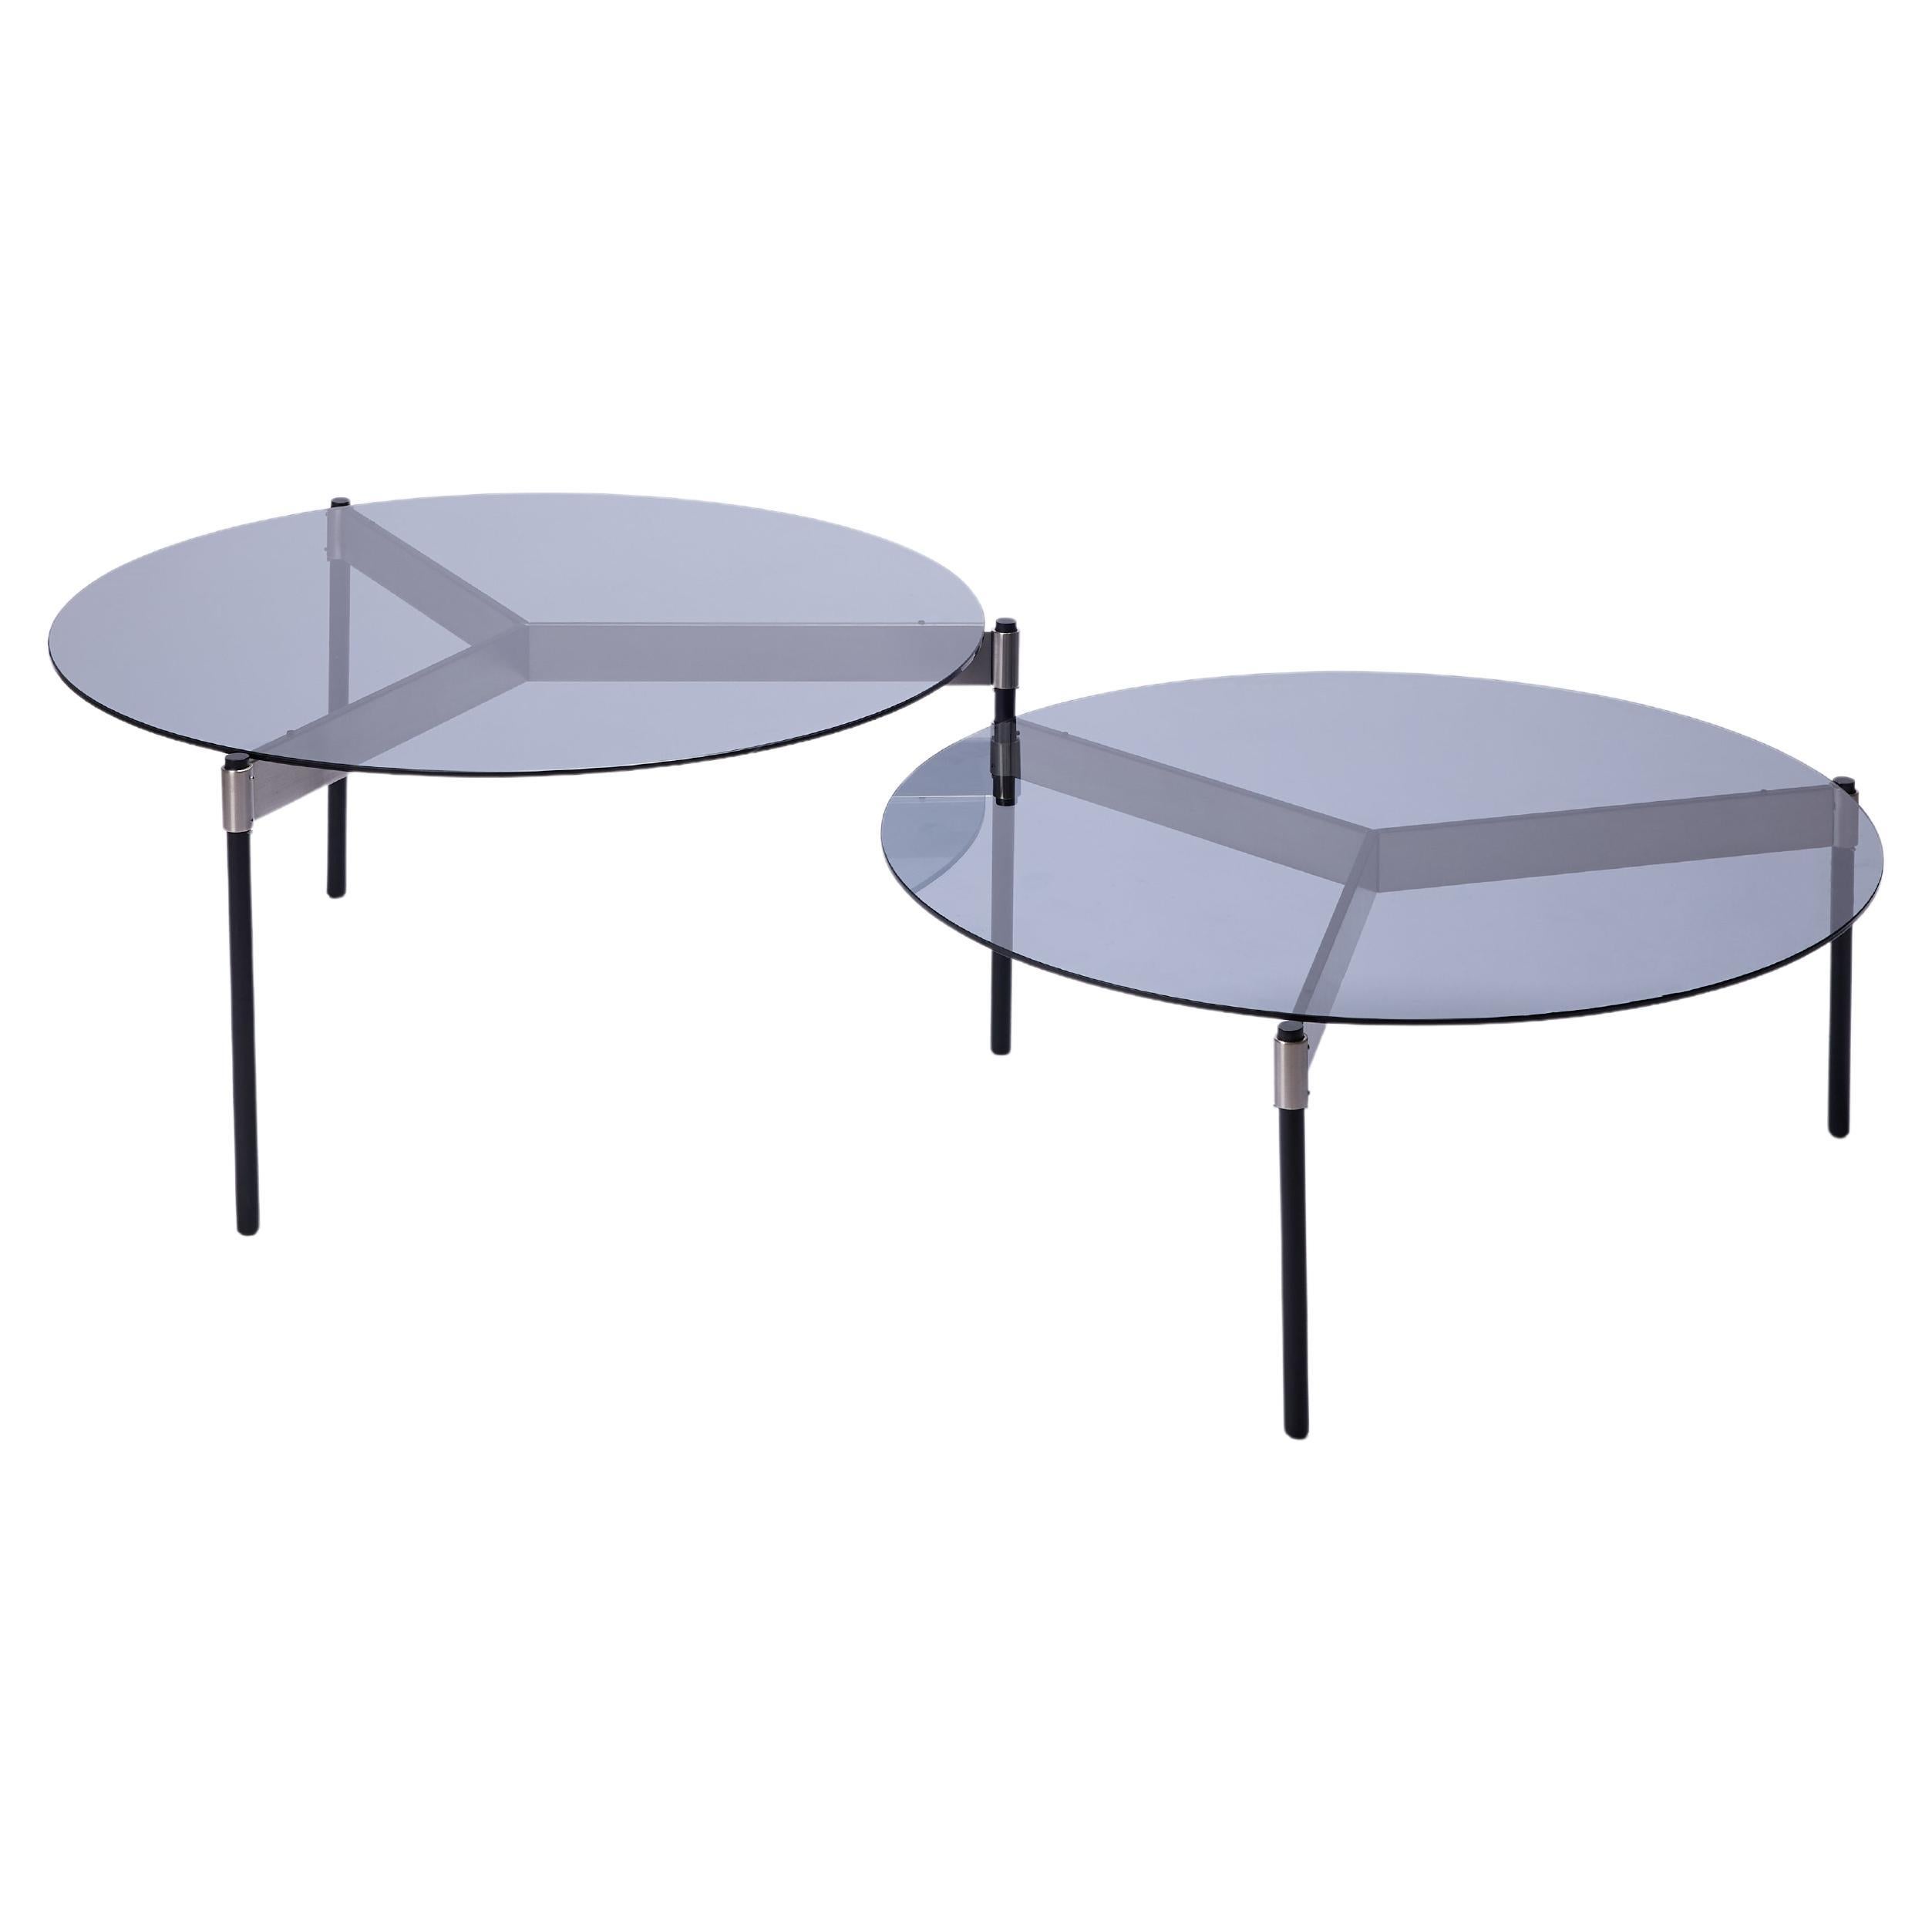 MOON Contemporary Round Coffee Table with Glass Tops and Steel Legs by Ries